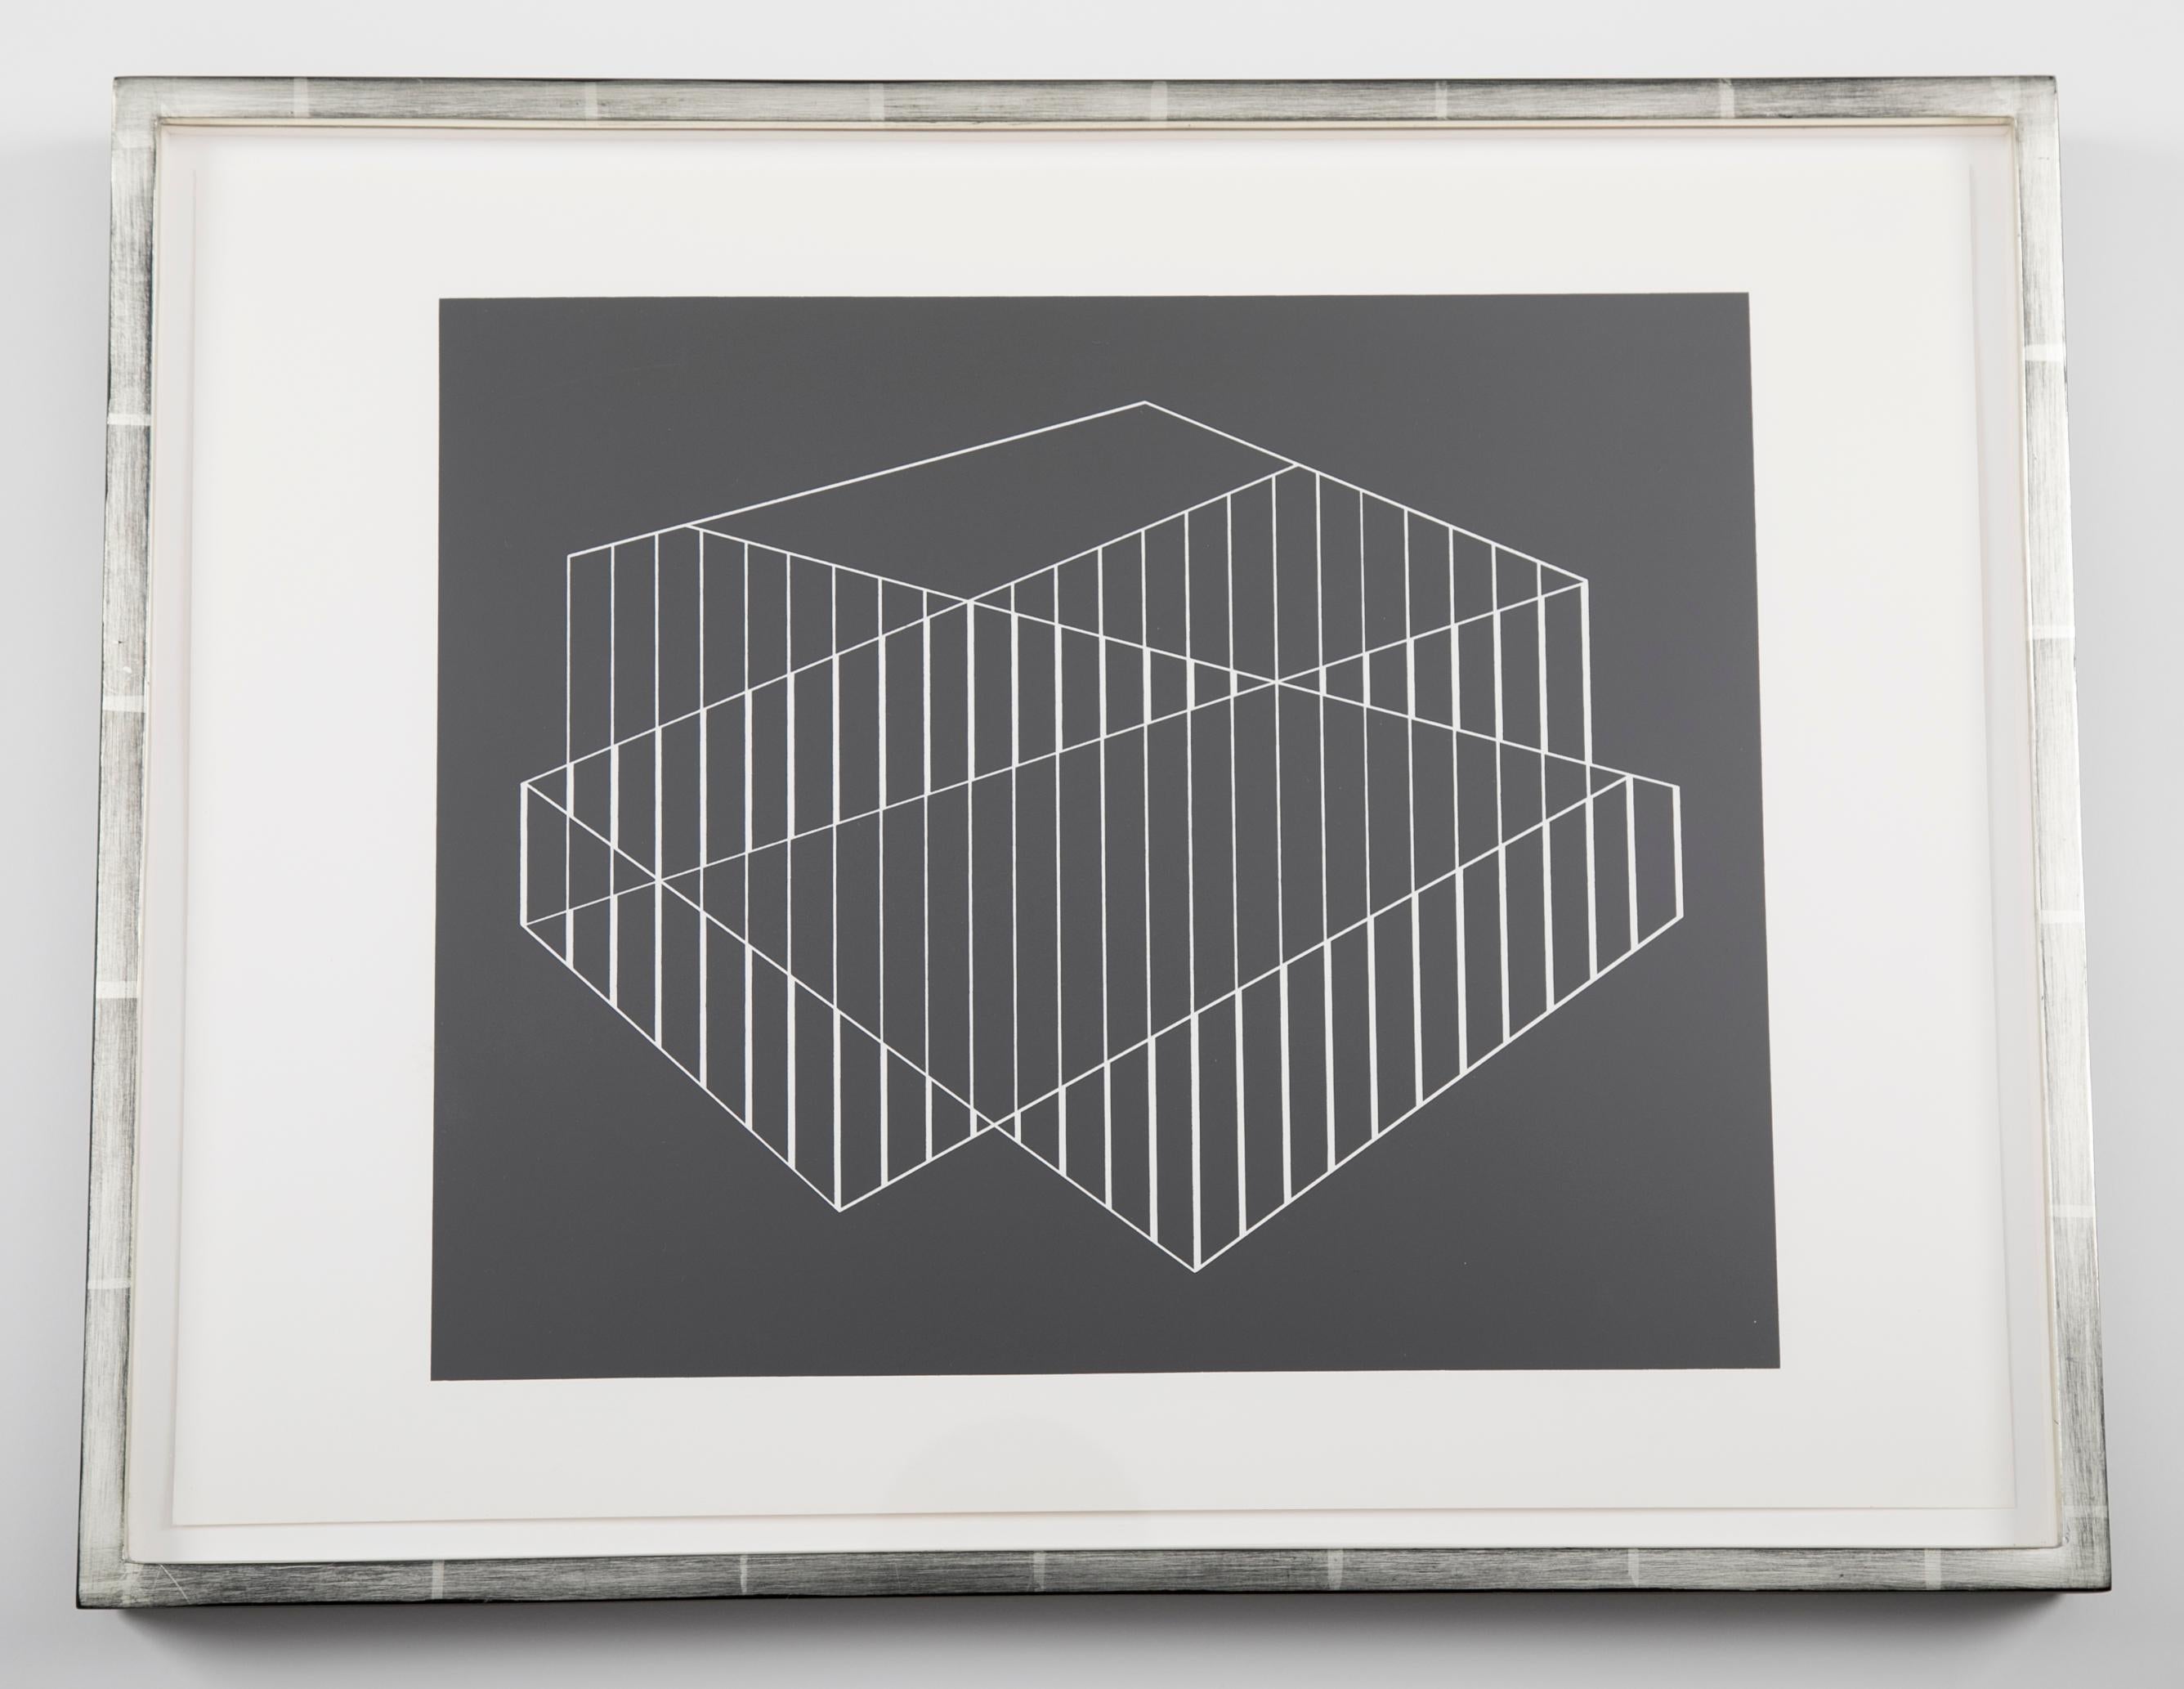 Josef Albers from Formulation: Articulation, 1972. Silkscreen prints, Folio II / Folder 6 . Floated in 12 karat white gold gilt frame using all acid free archival materials. #176 of 1000 printed. Printed by Sirocco Screen printing, New Haven.